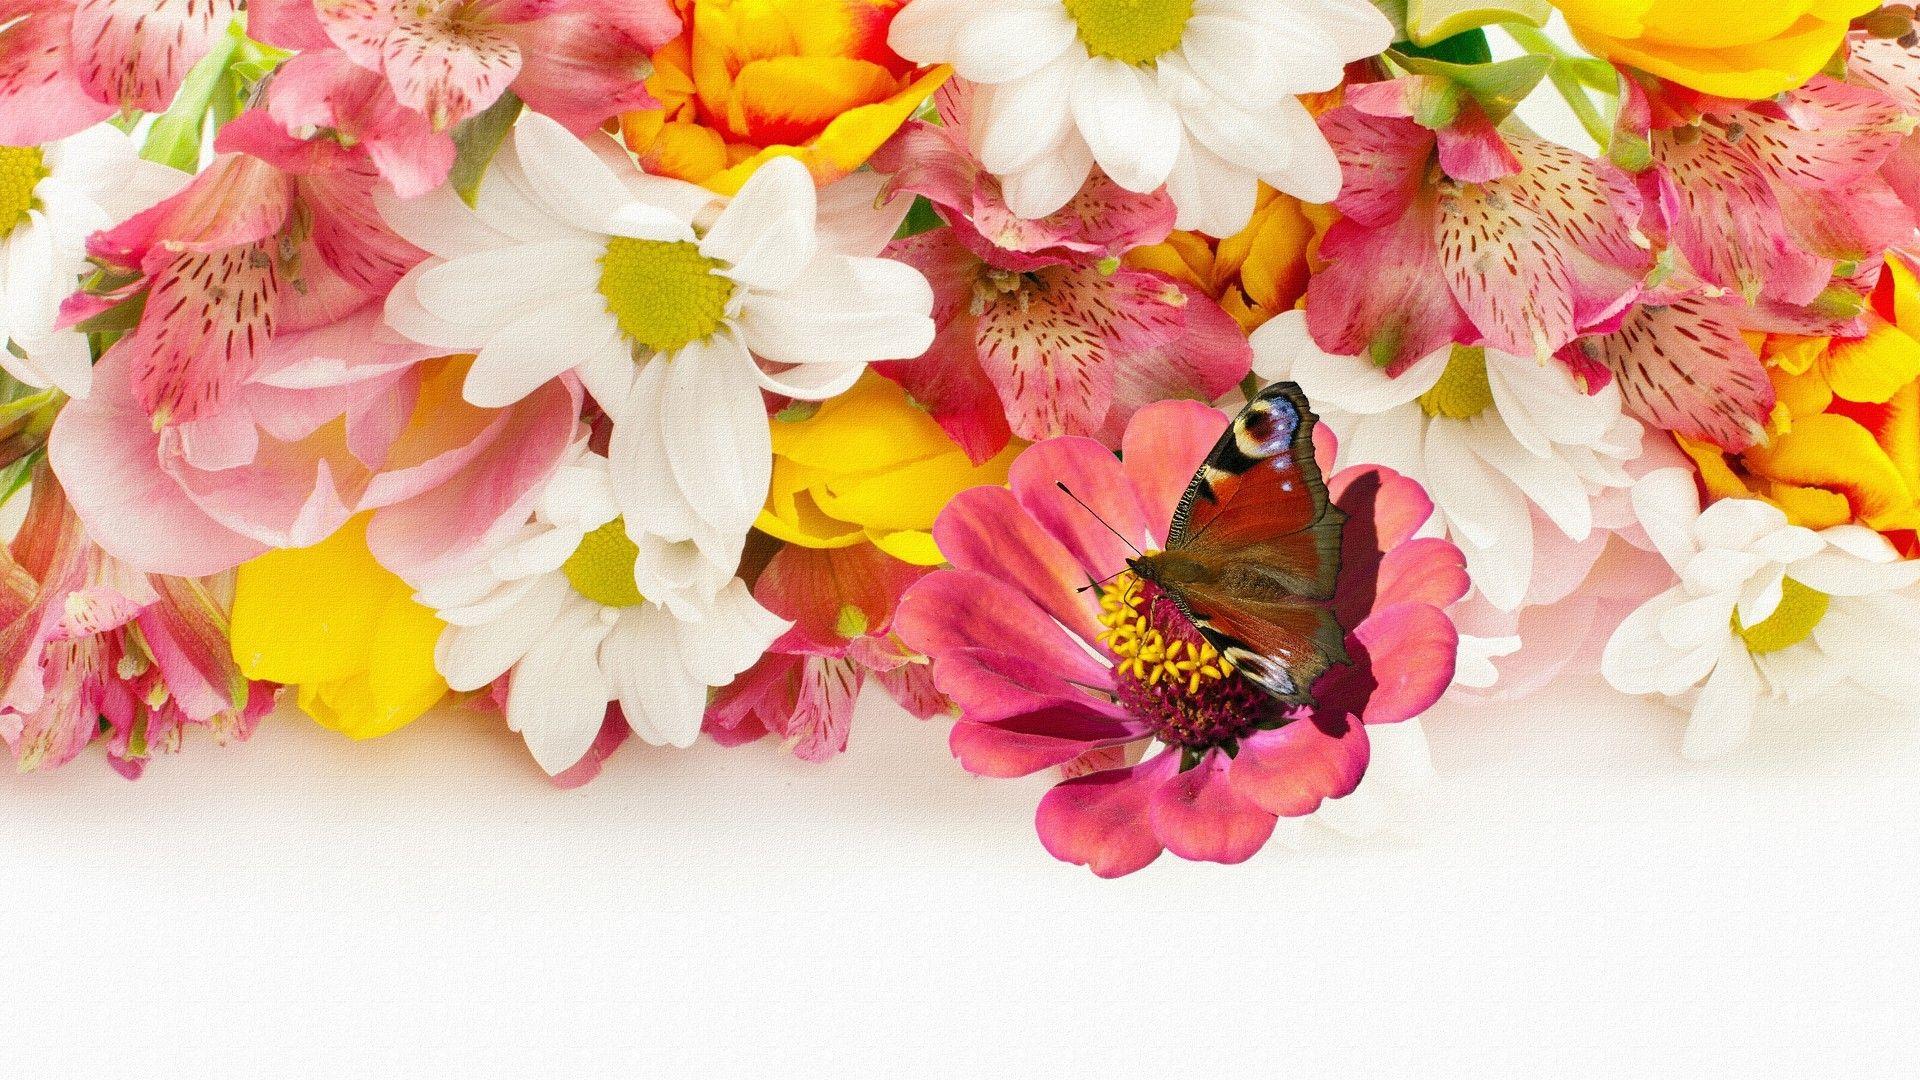 Butterfly Tag wallpaper: Colorful Colors Flower Flowers Yellow